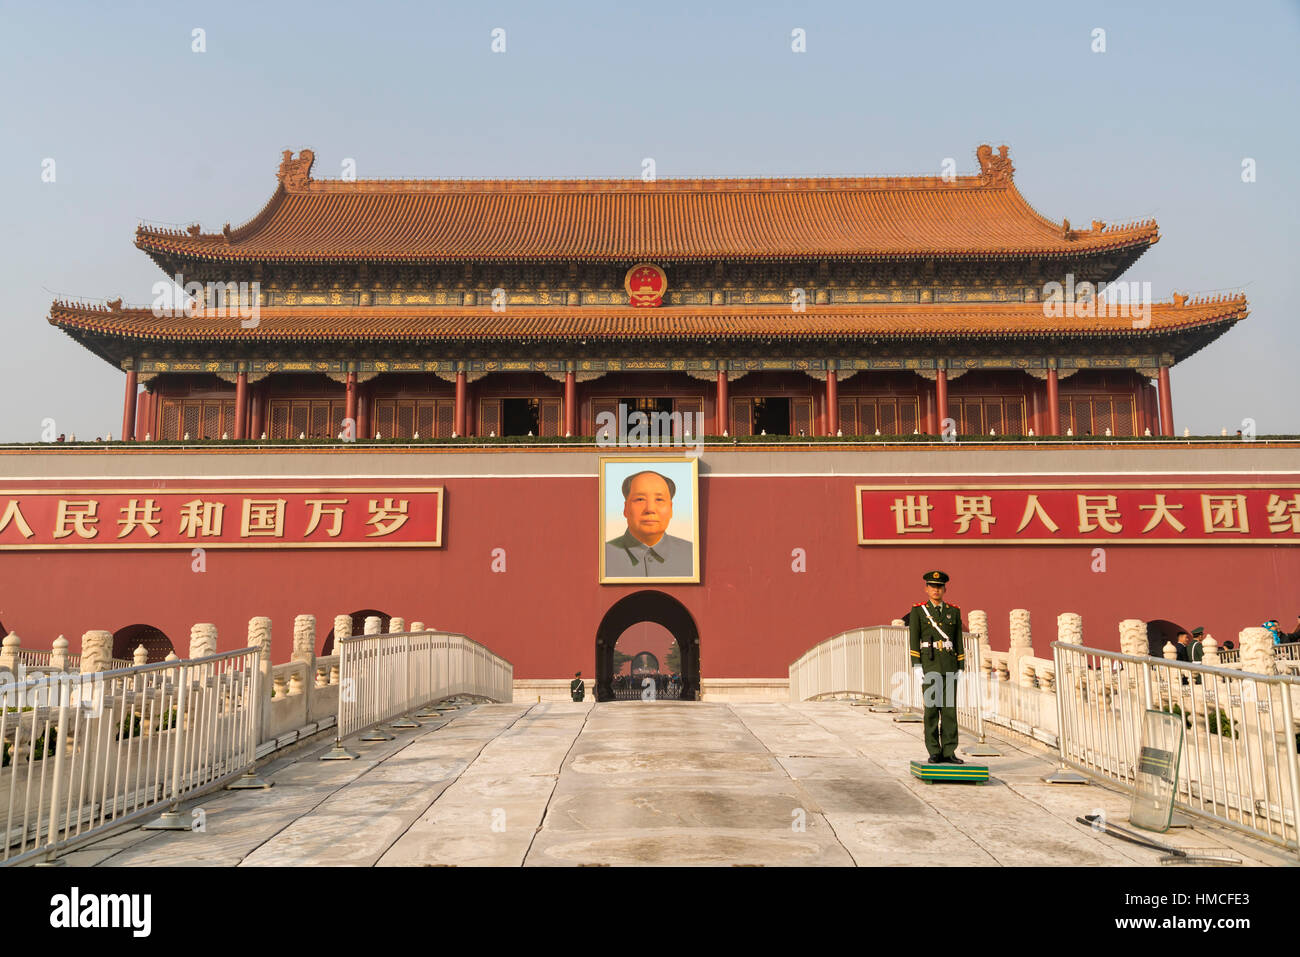 Guard and portrait of Mao Zedong at the Tiananmen gate, Beijing, People's Republic of China, Asia Stock Photo